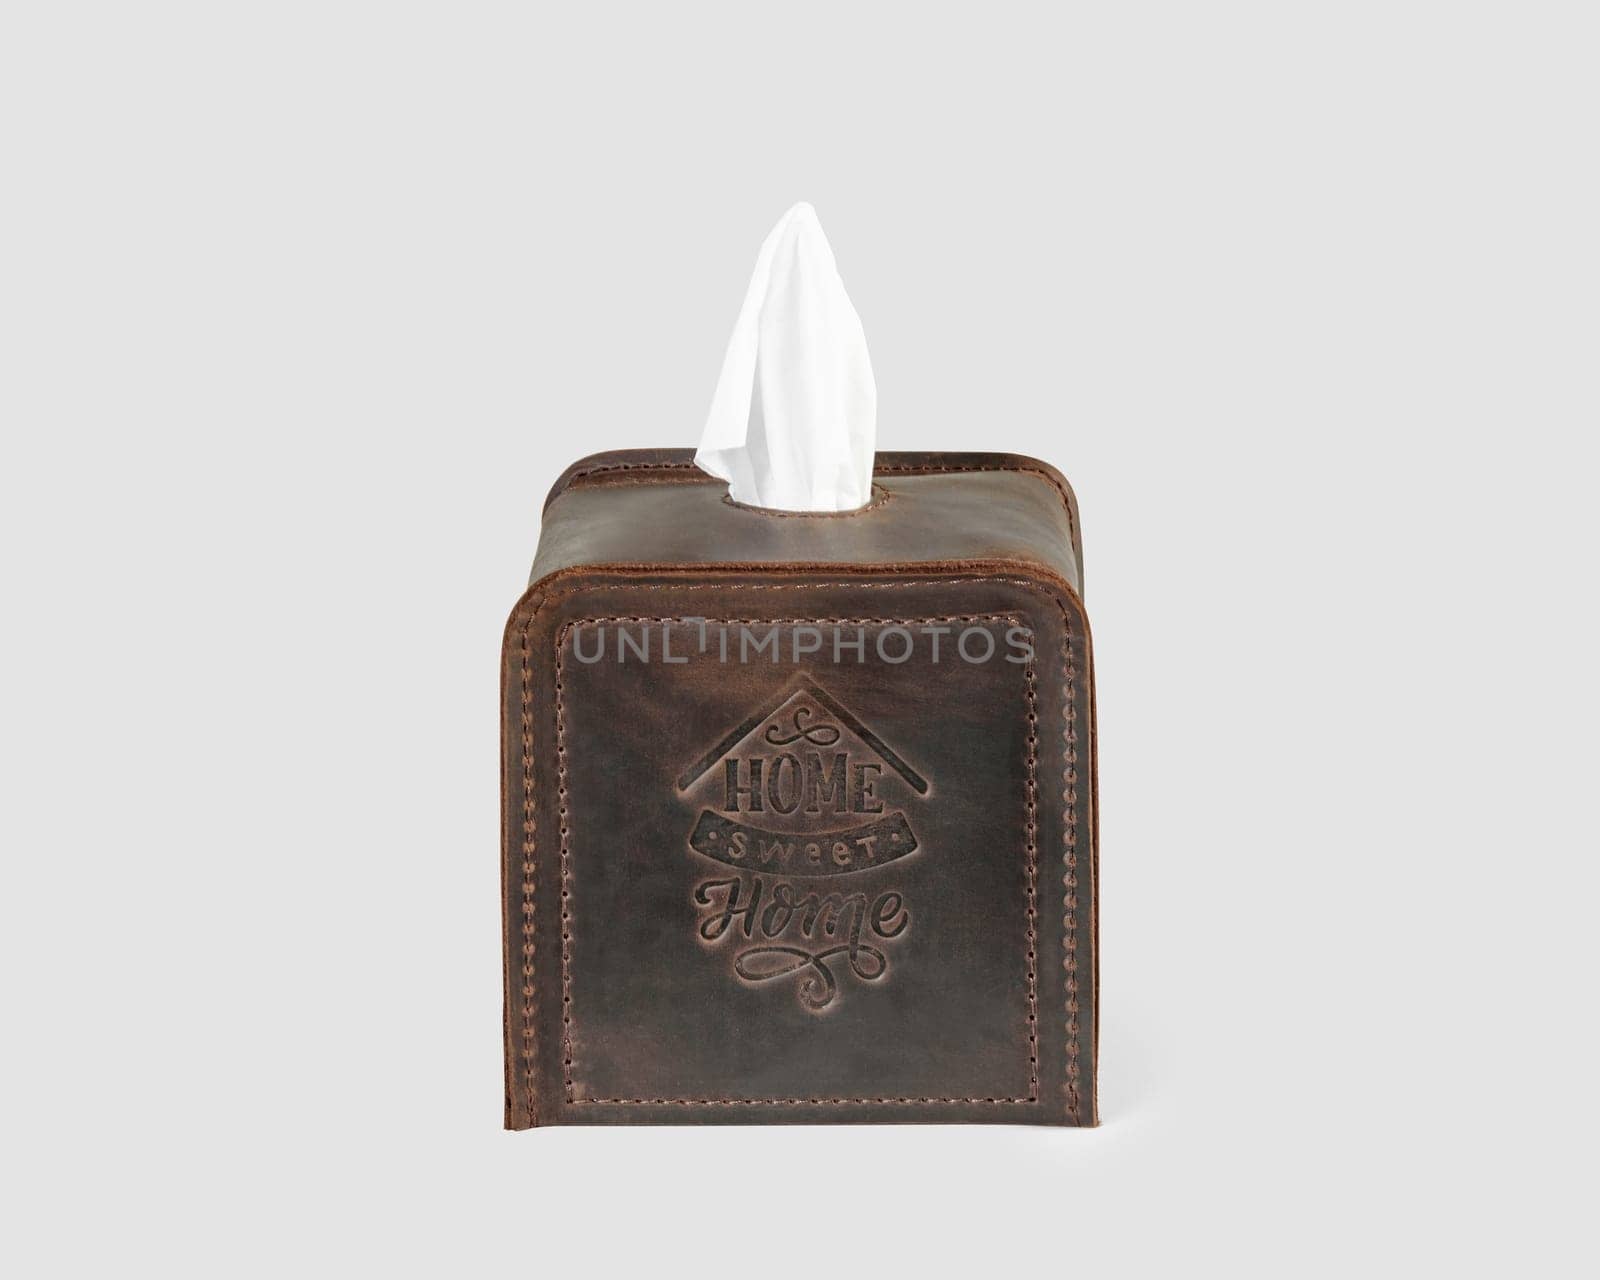 Stylish and convenient brown leather tissue box cover decorated with embossing, isolated on white background. Artisanal home decor accessory